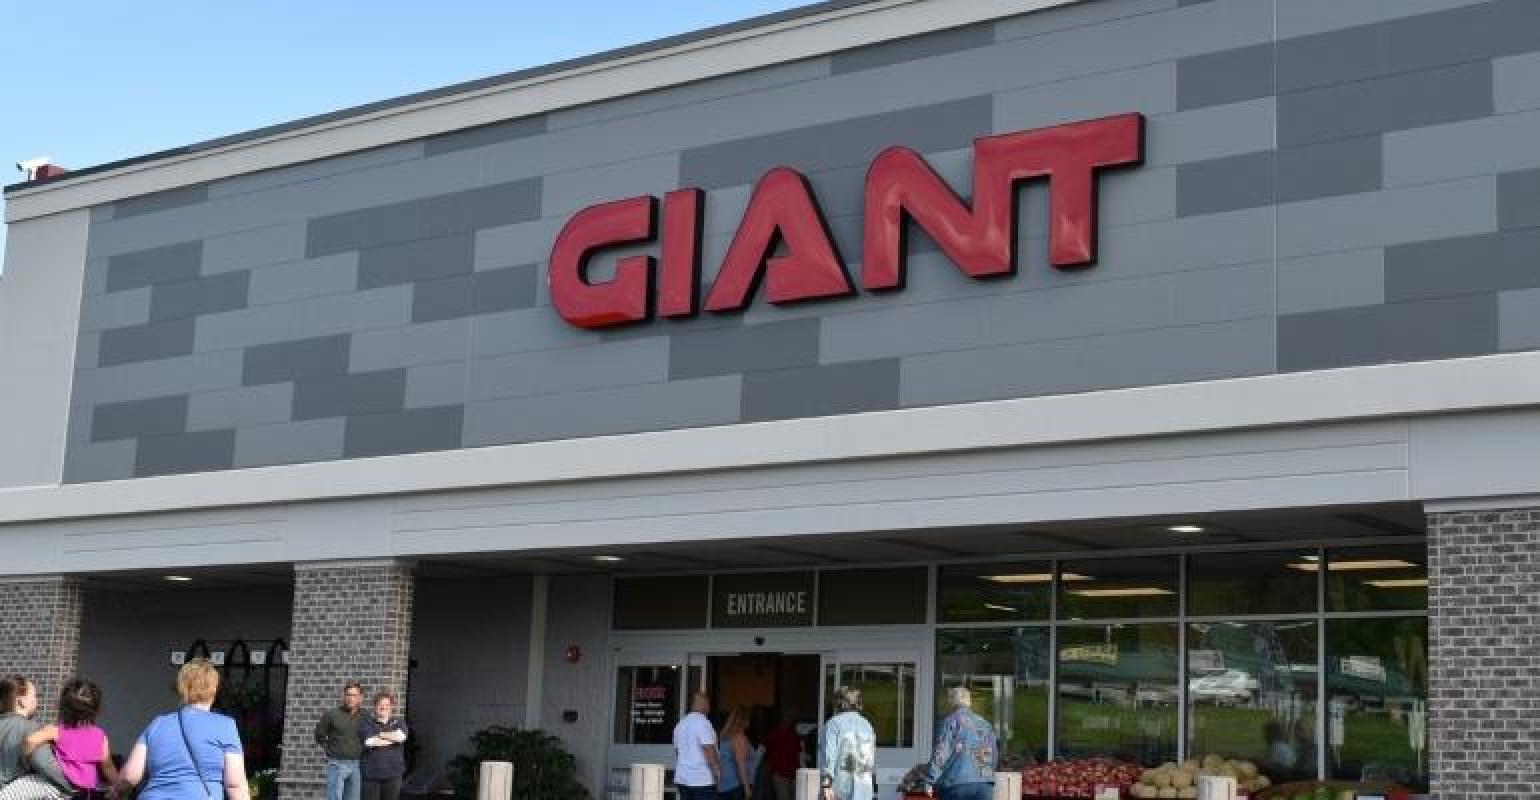 Giant Food Stores has bigger plans for Pennsylvania